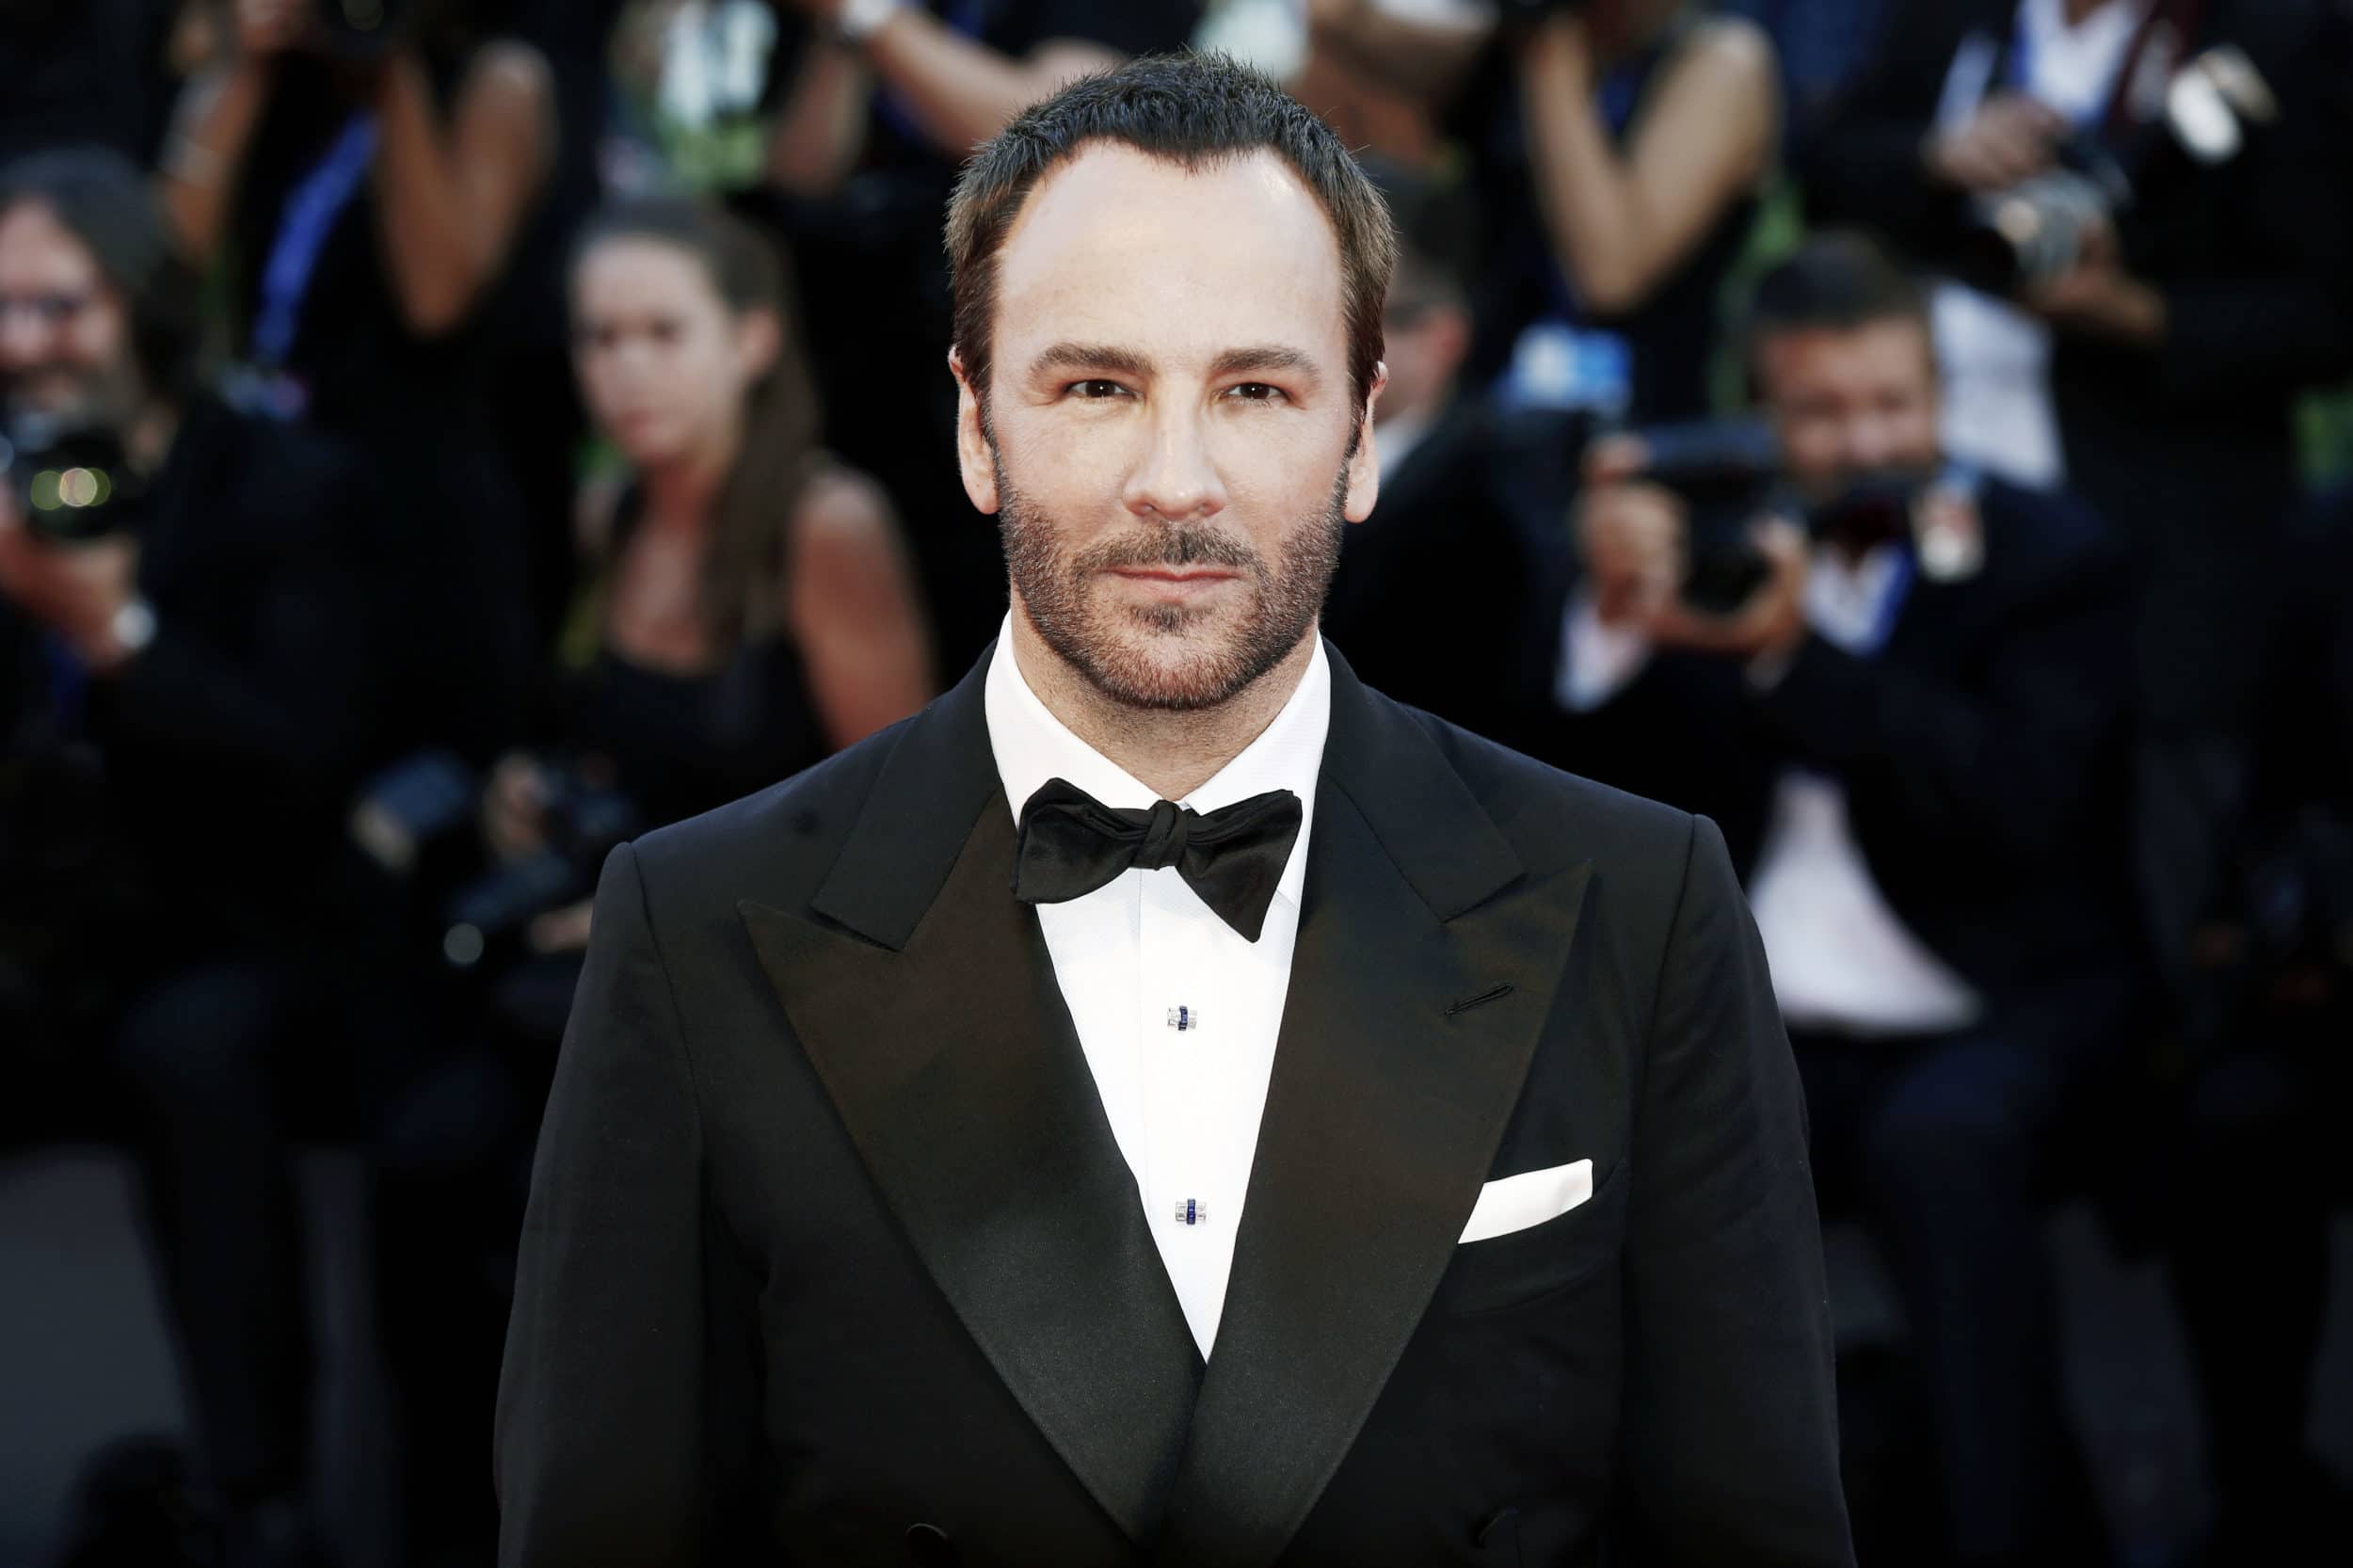 There are the 6 timeless rules of style for men, according to Tom Ford